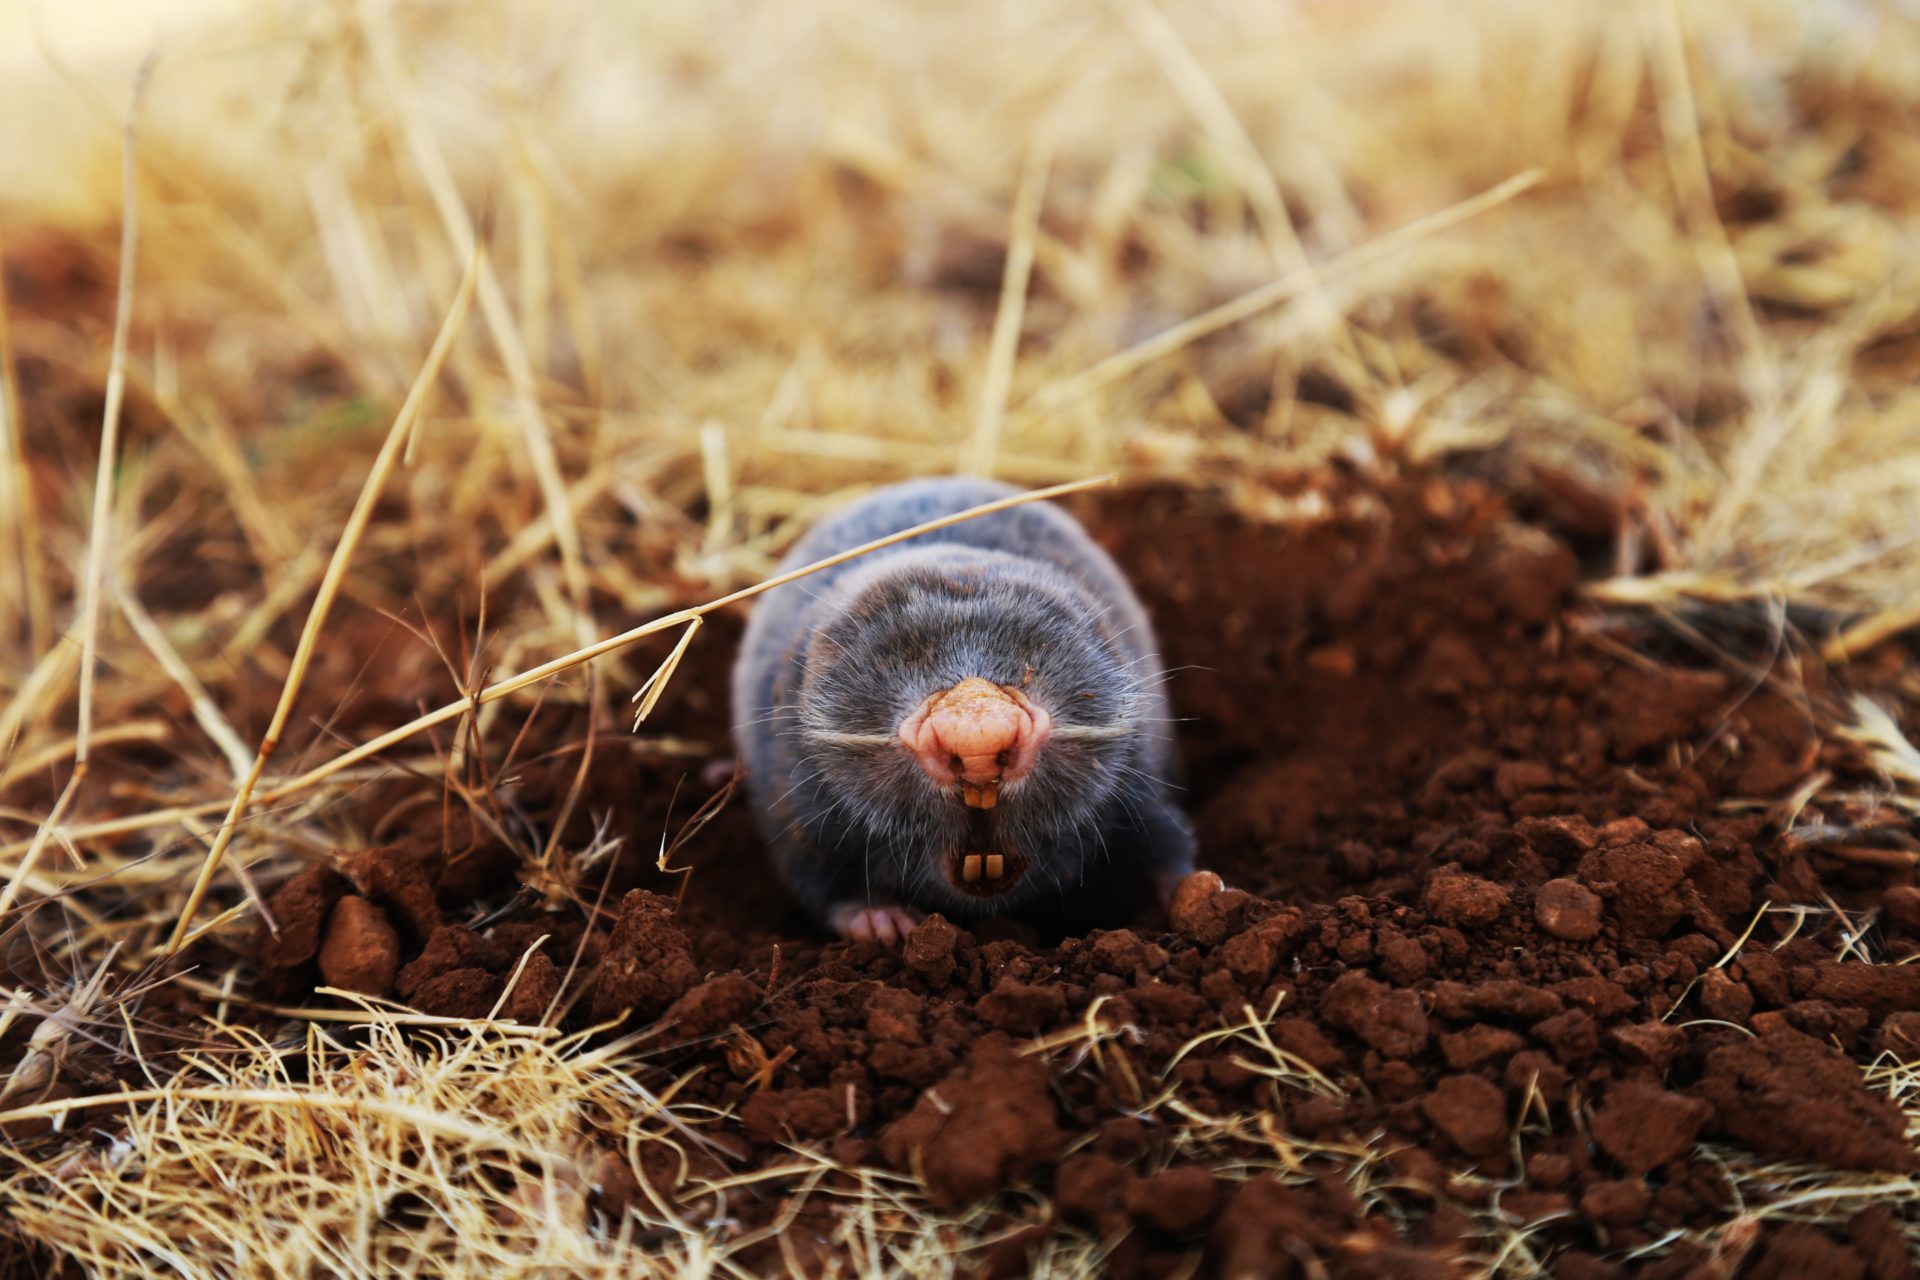 mole in natural environment